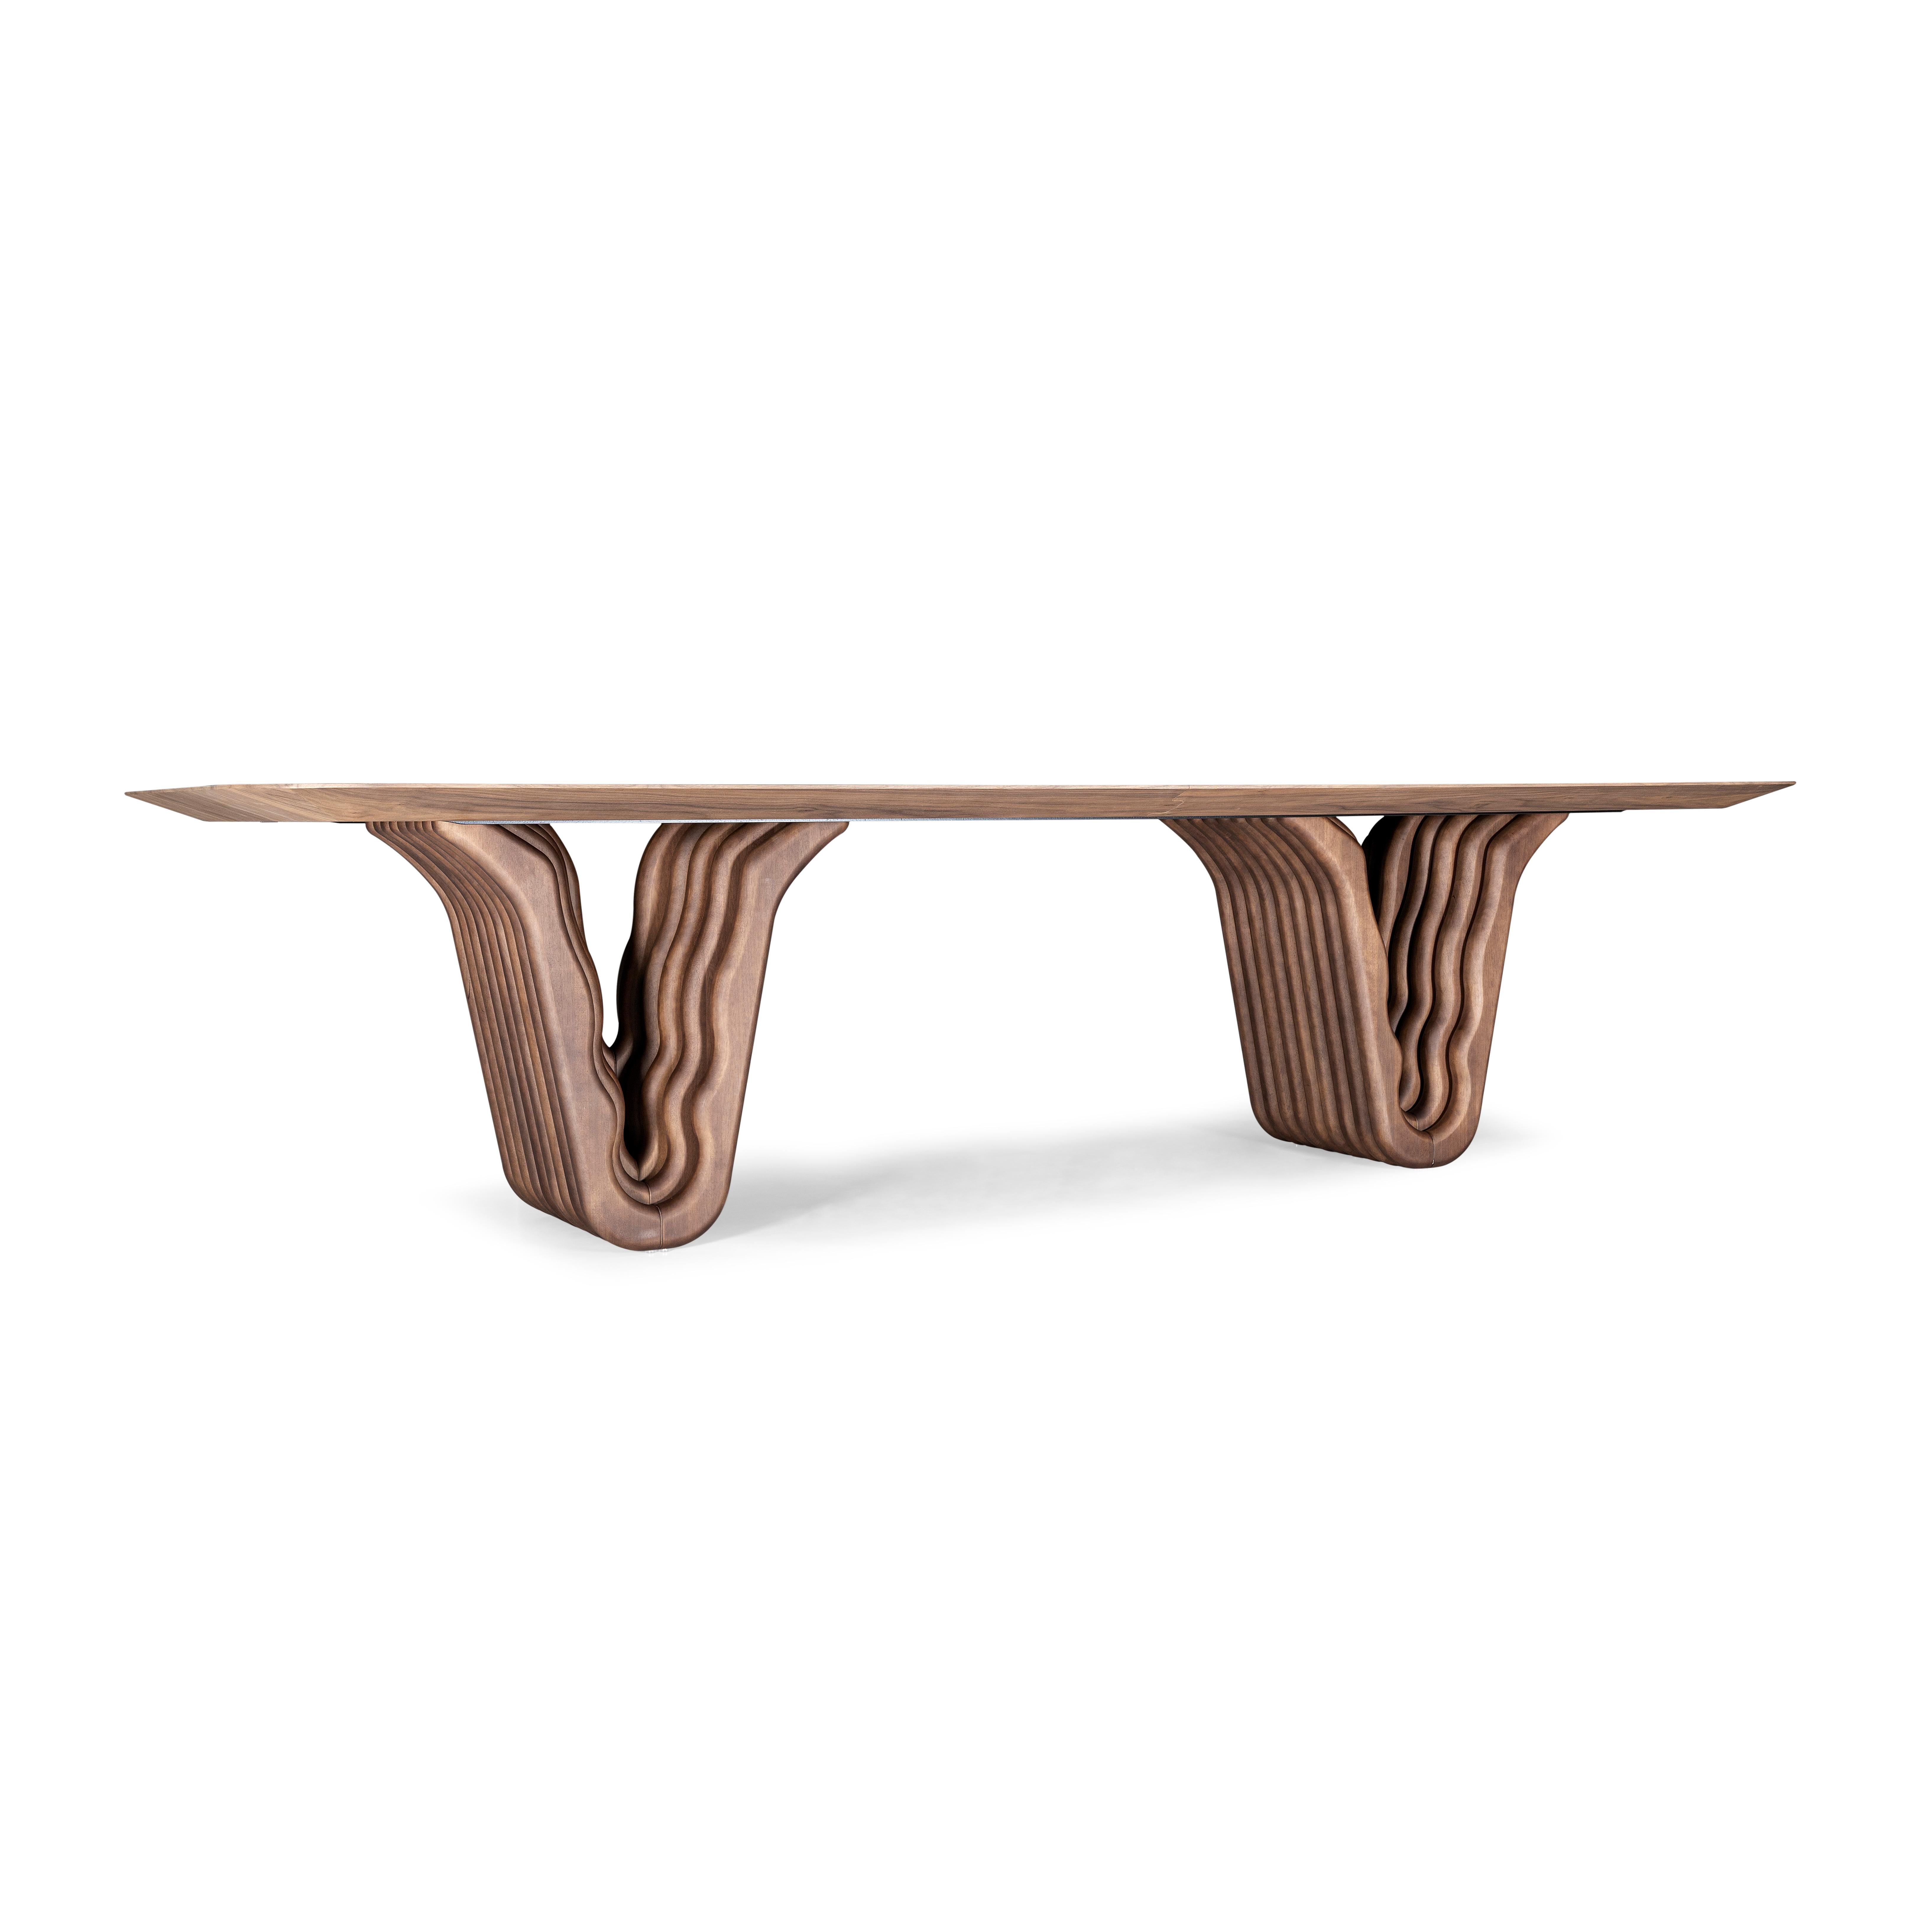 Inspirations are experiences transformed into ideas. One of the treasures of design is to give shape and life to products that bring something special into their conception. Thus emerges the Dolomites Dining Table, a piece of iconic design made with